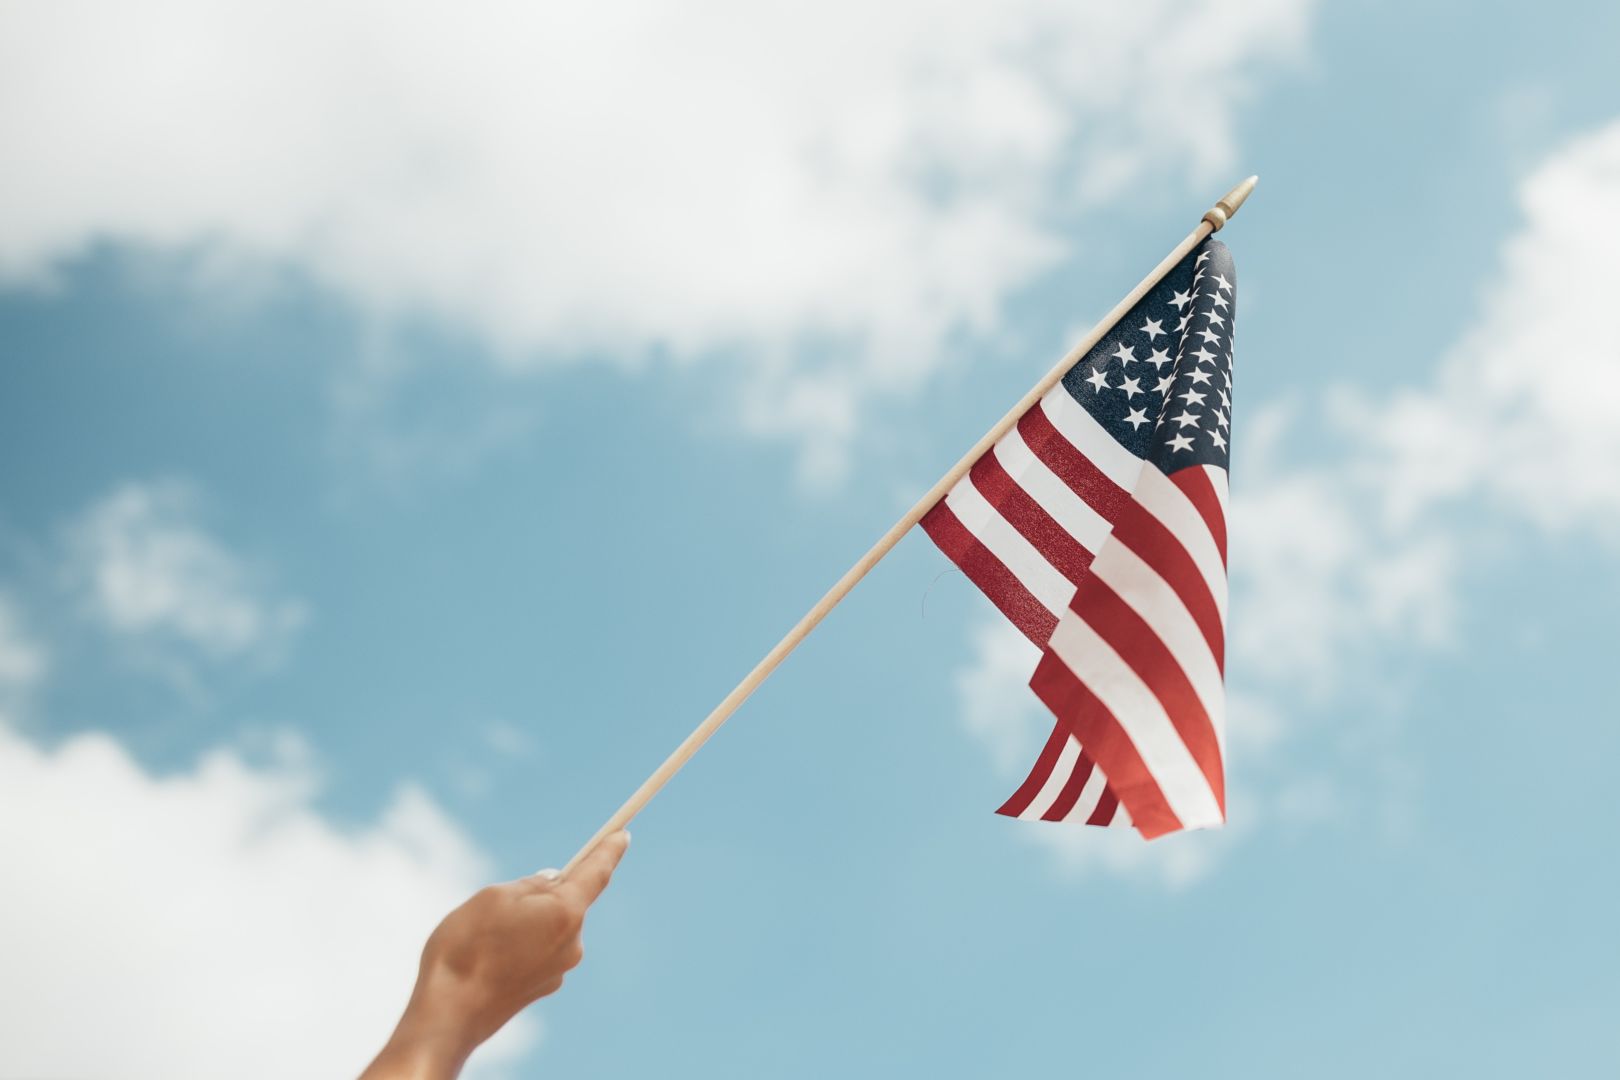 An American flag on a stick in front of a blue sky with clouds.